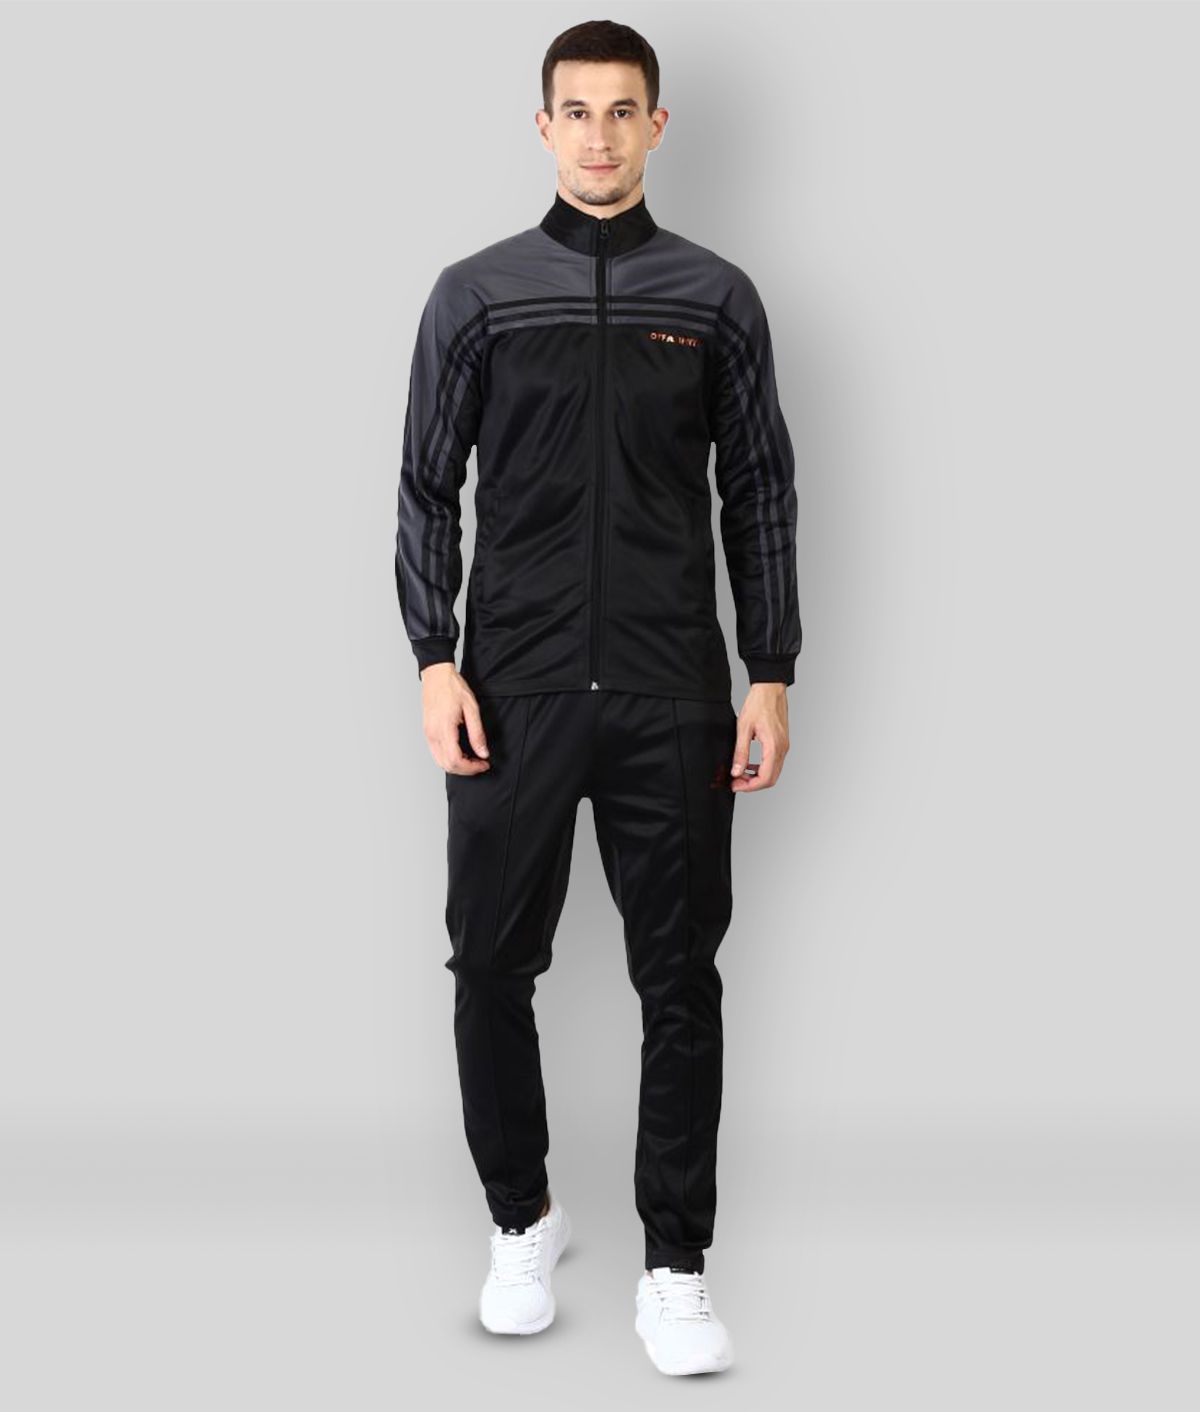 OFF LIMITS - Multicolor Polyester Regular Fit Colorblock Men's Sports Tracksuit ( Pack of 1 )